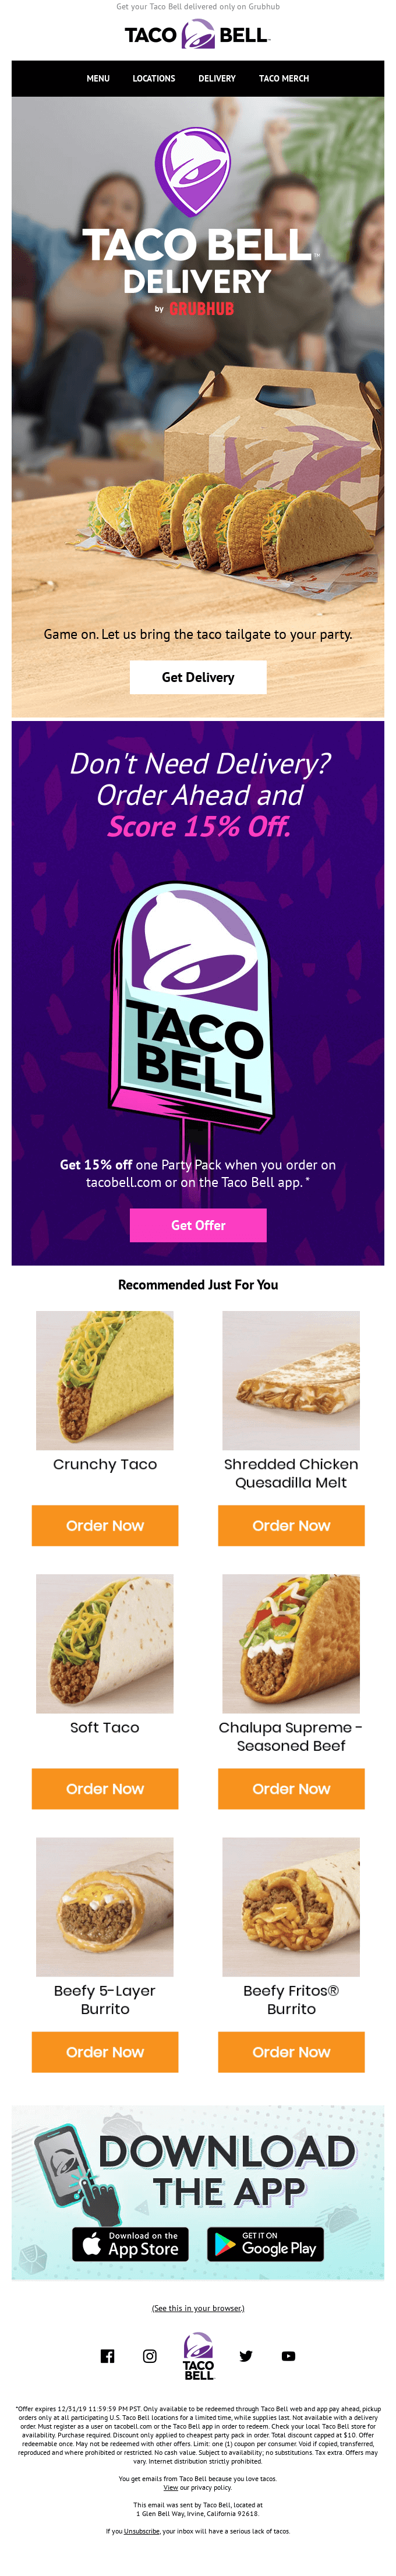 Taco Bell delivery email